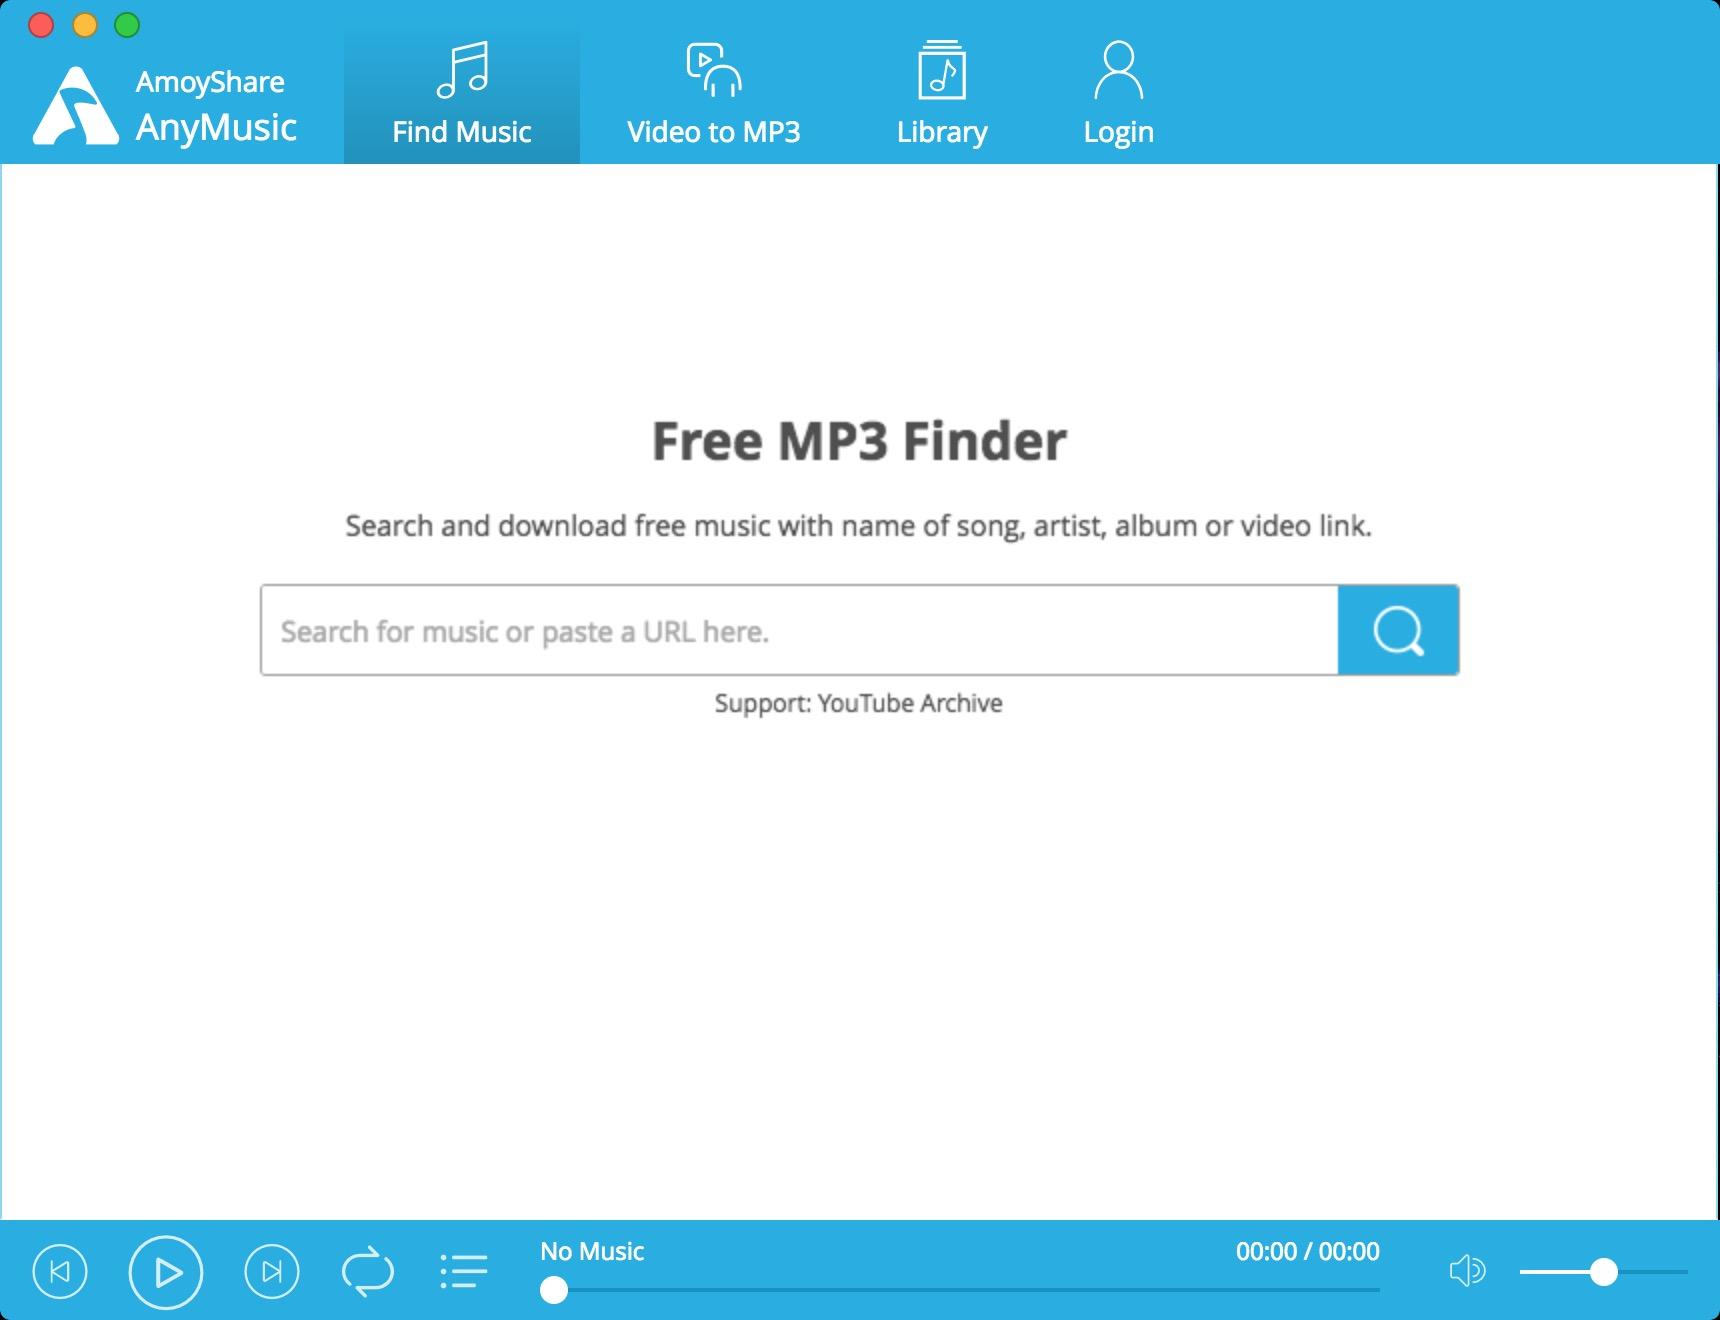 AnyMusic MP3 Downloader